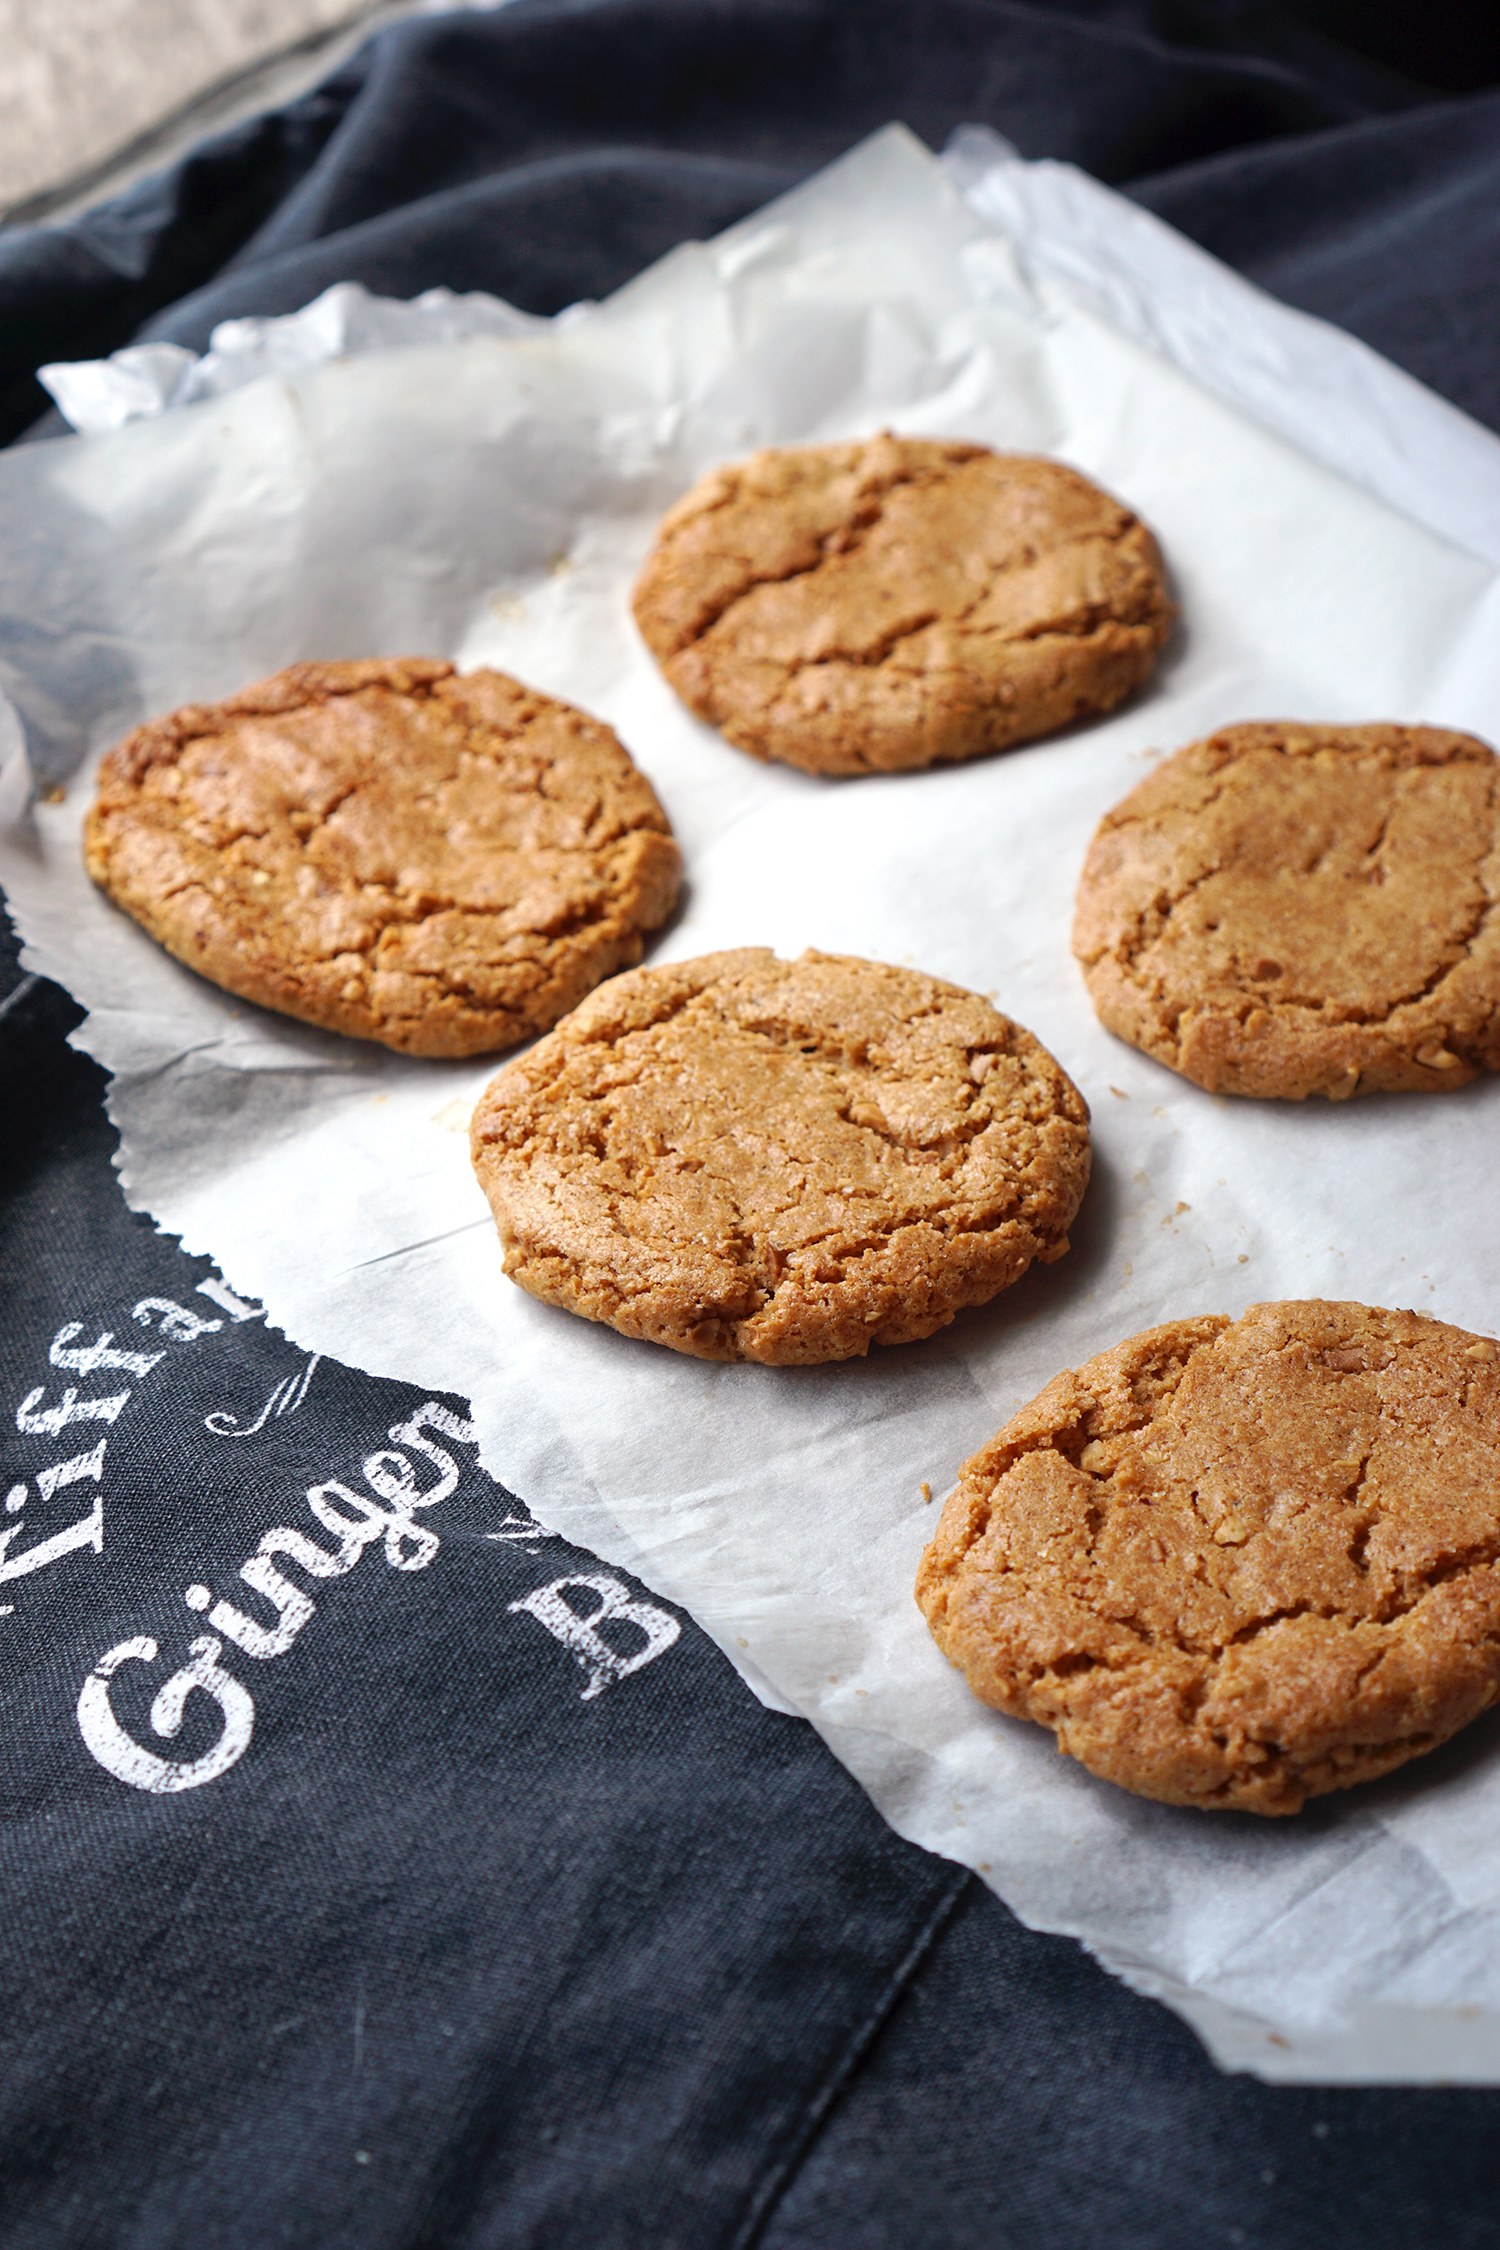 RECIPE: gluten free low flour peanut butter cookies made with Morrisons 100% peanut butter and Doves Farm gluten free self-raising flour | Gluten free recipes | Gluten free baking | Recipe by Kimi Eats Gluten Free